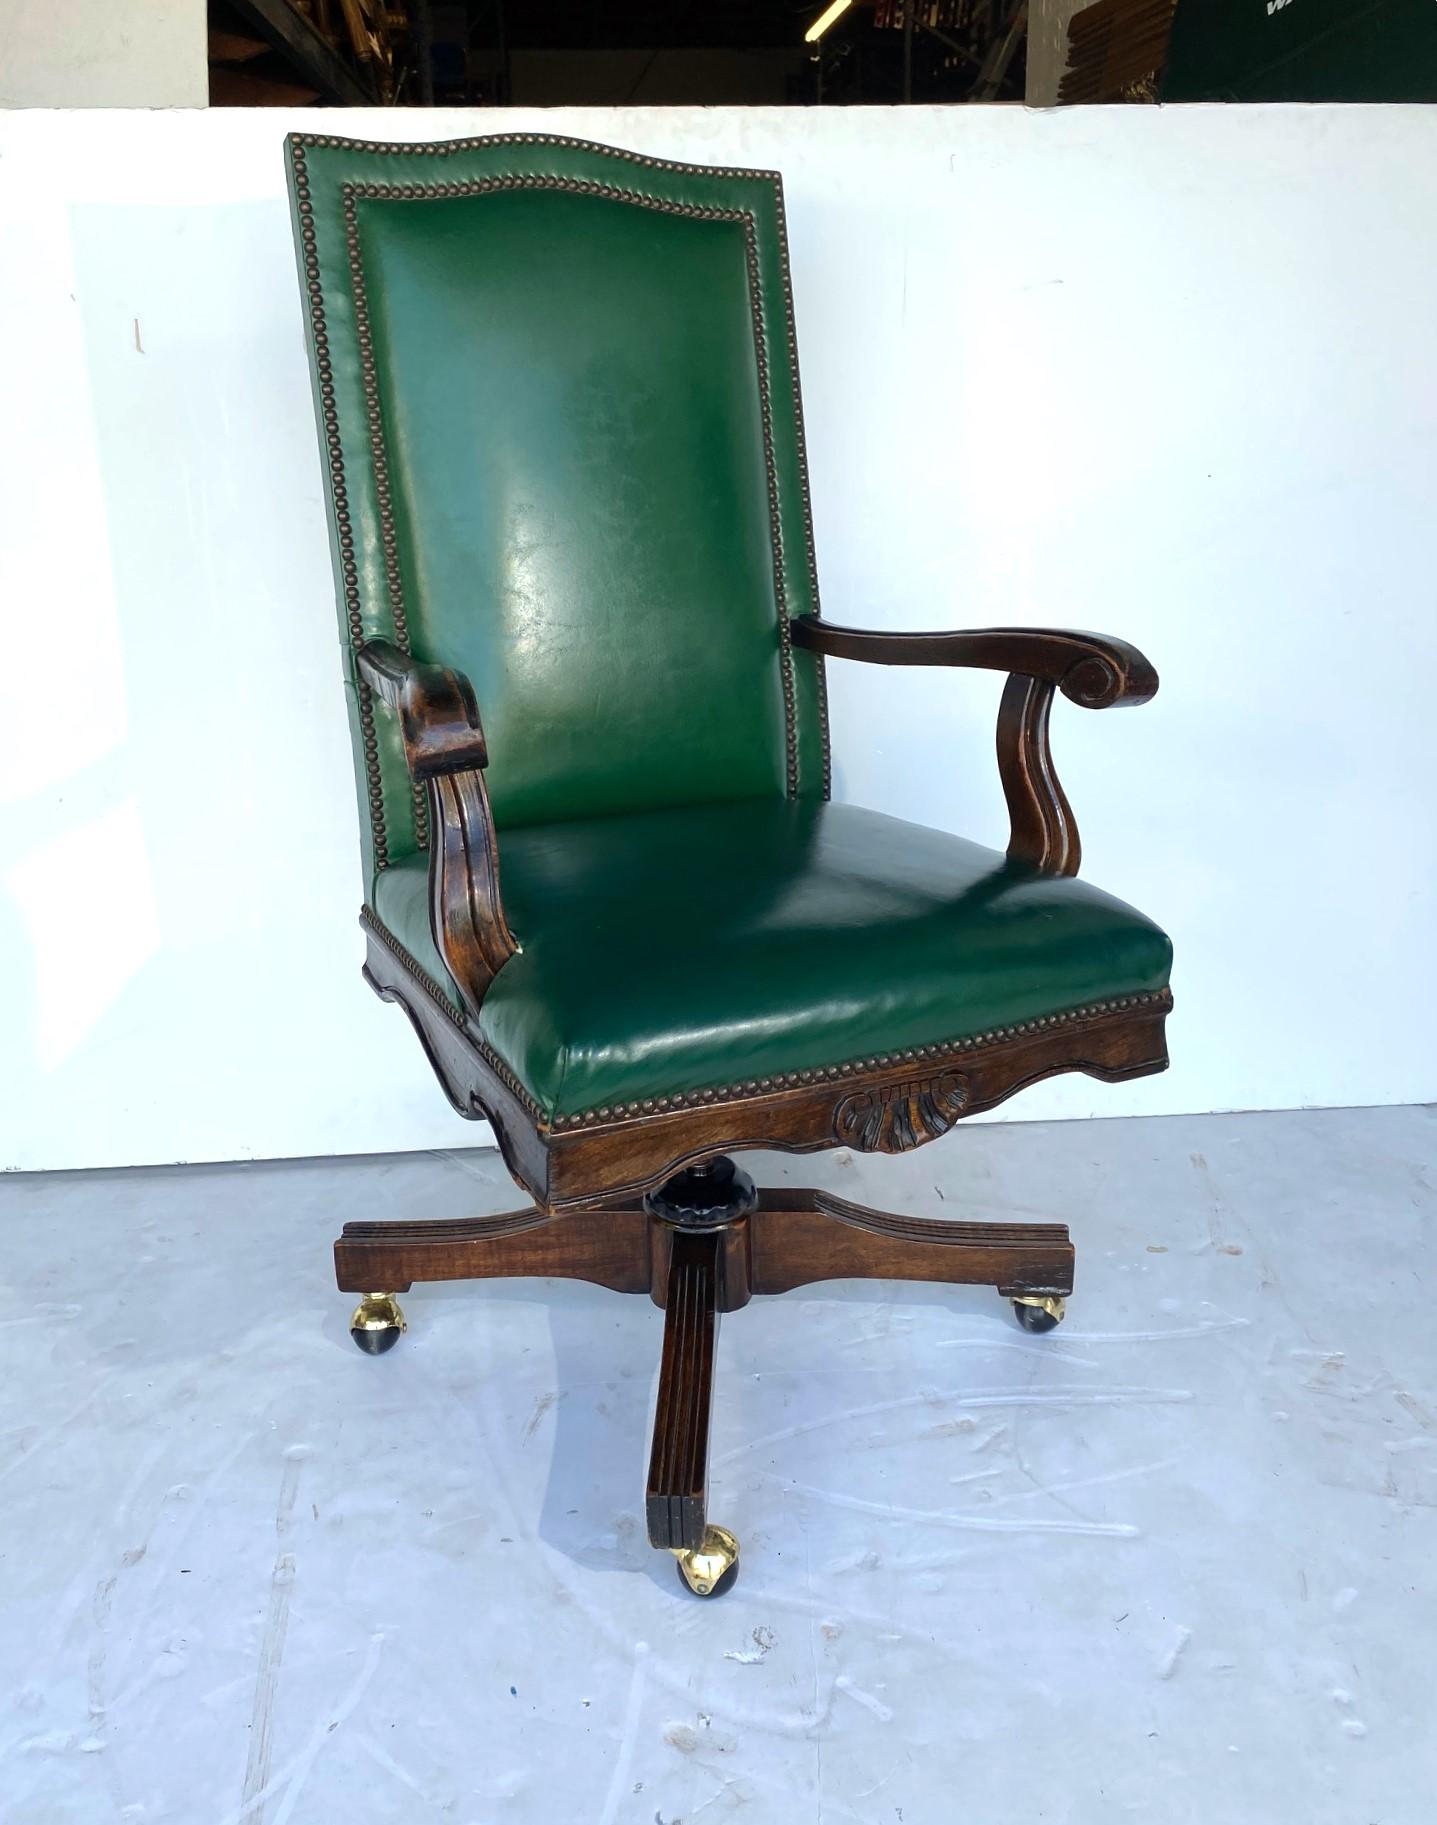 Vintage leather swivel office chair. The chair can be adjusted going back and forth. 